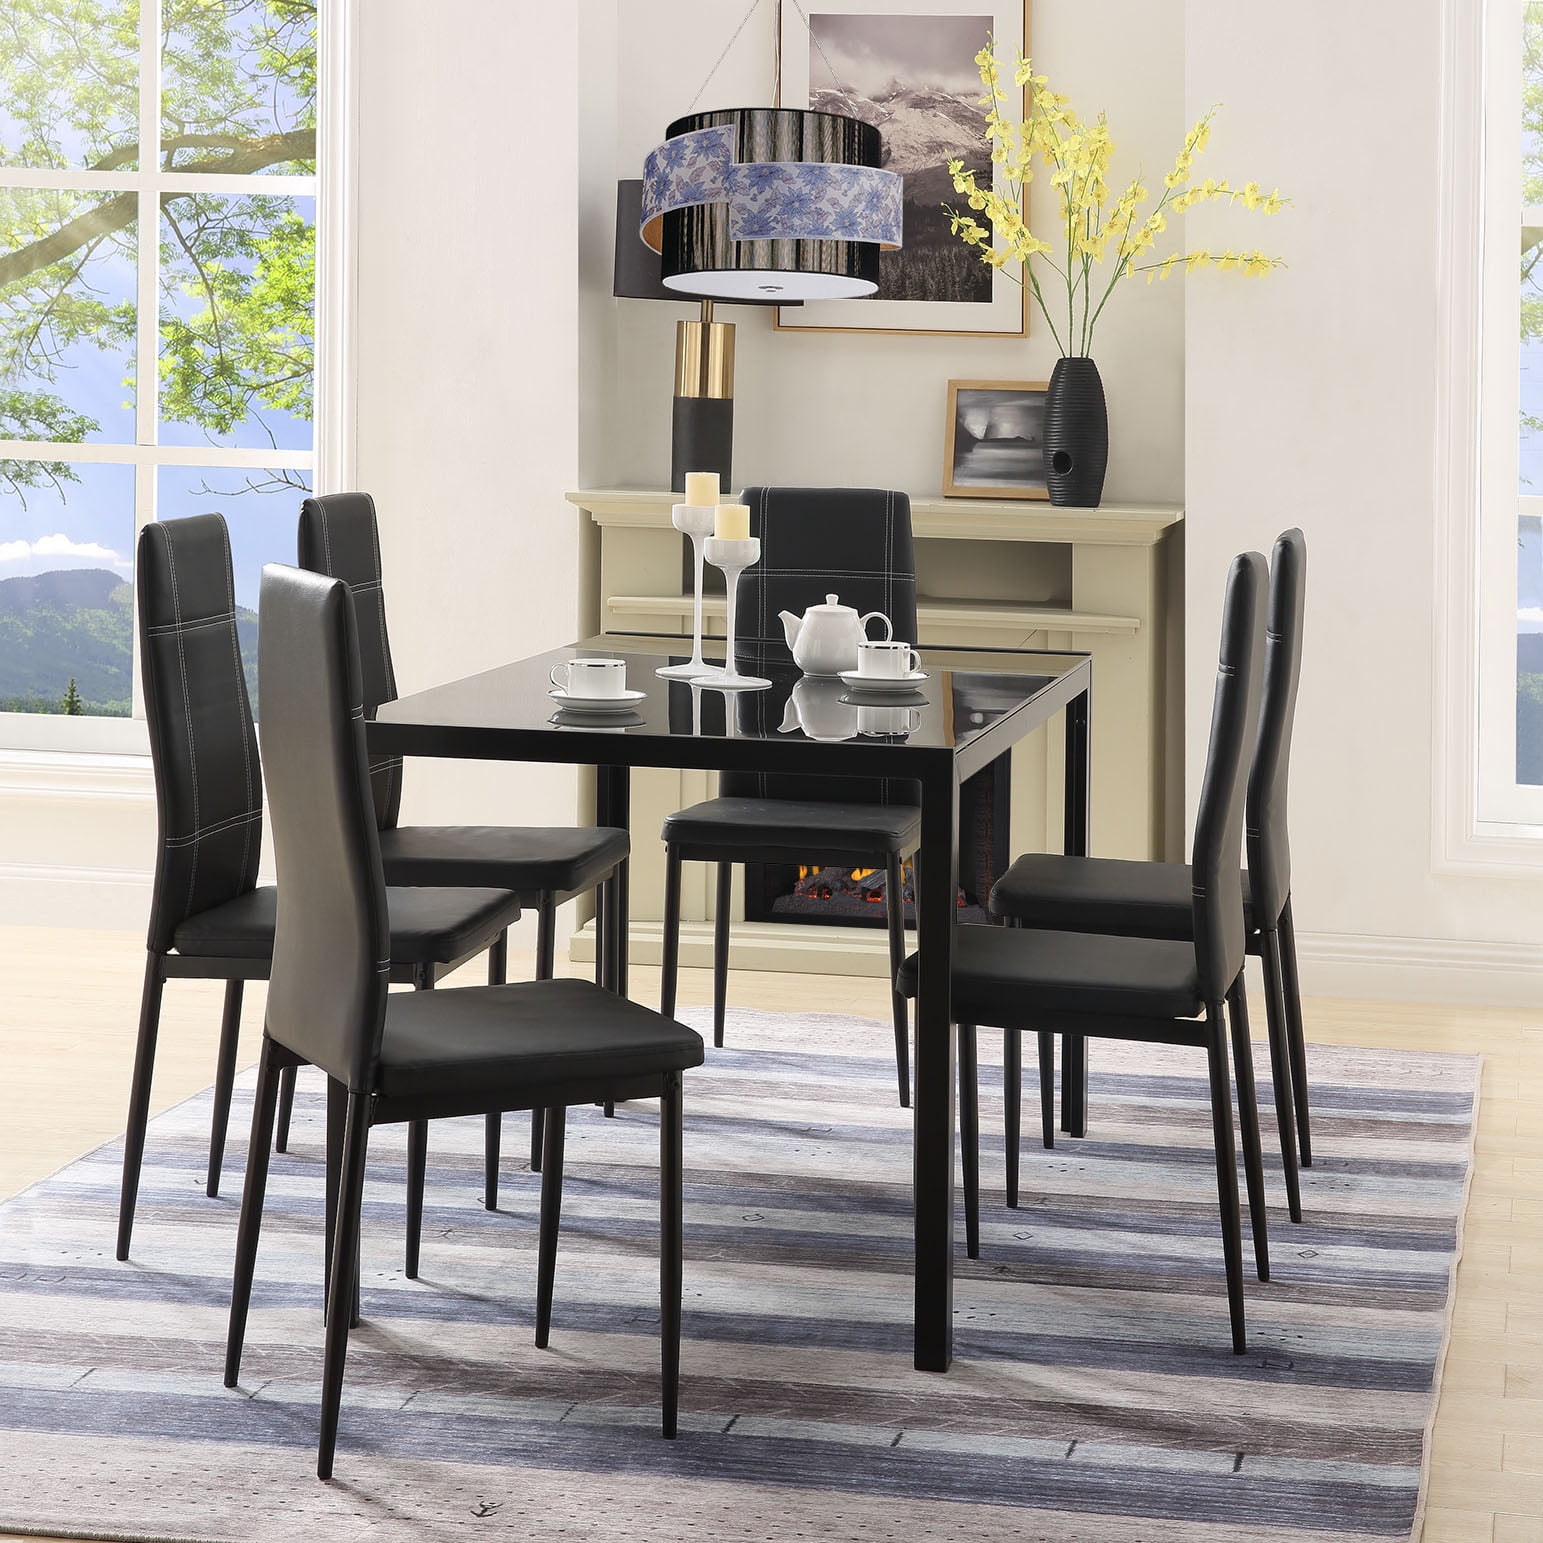 HomeSailing EU Dining Table and Chairs Set Glass Rectangle Table Black Faux Leather Chairs Metal Leg for Home Kitchen Dinning Room Small Space 1 Glass Dinning Table+4 Chair 